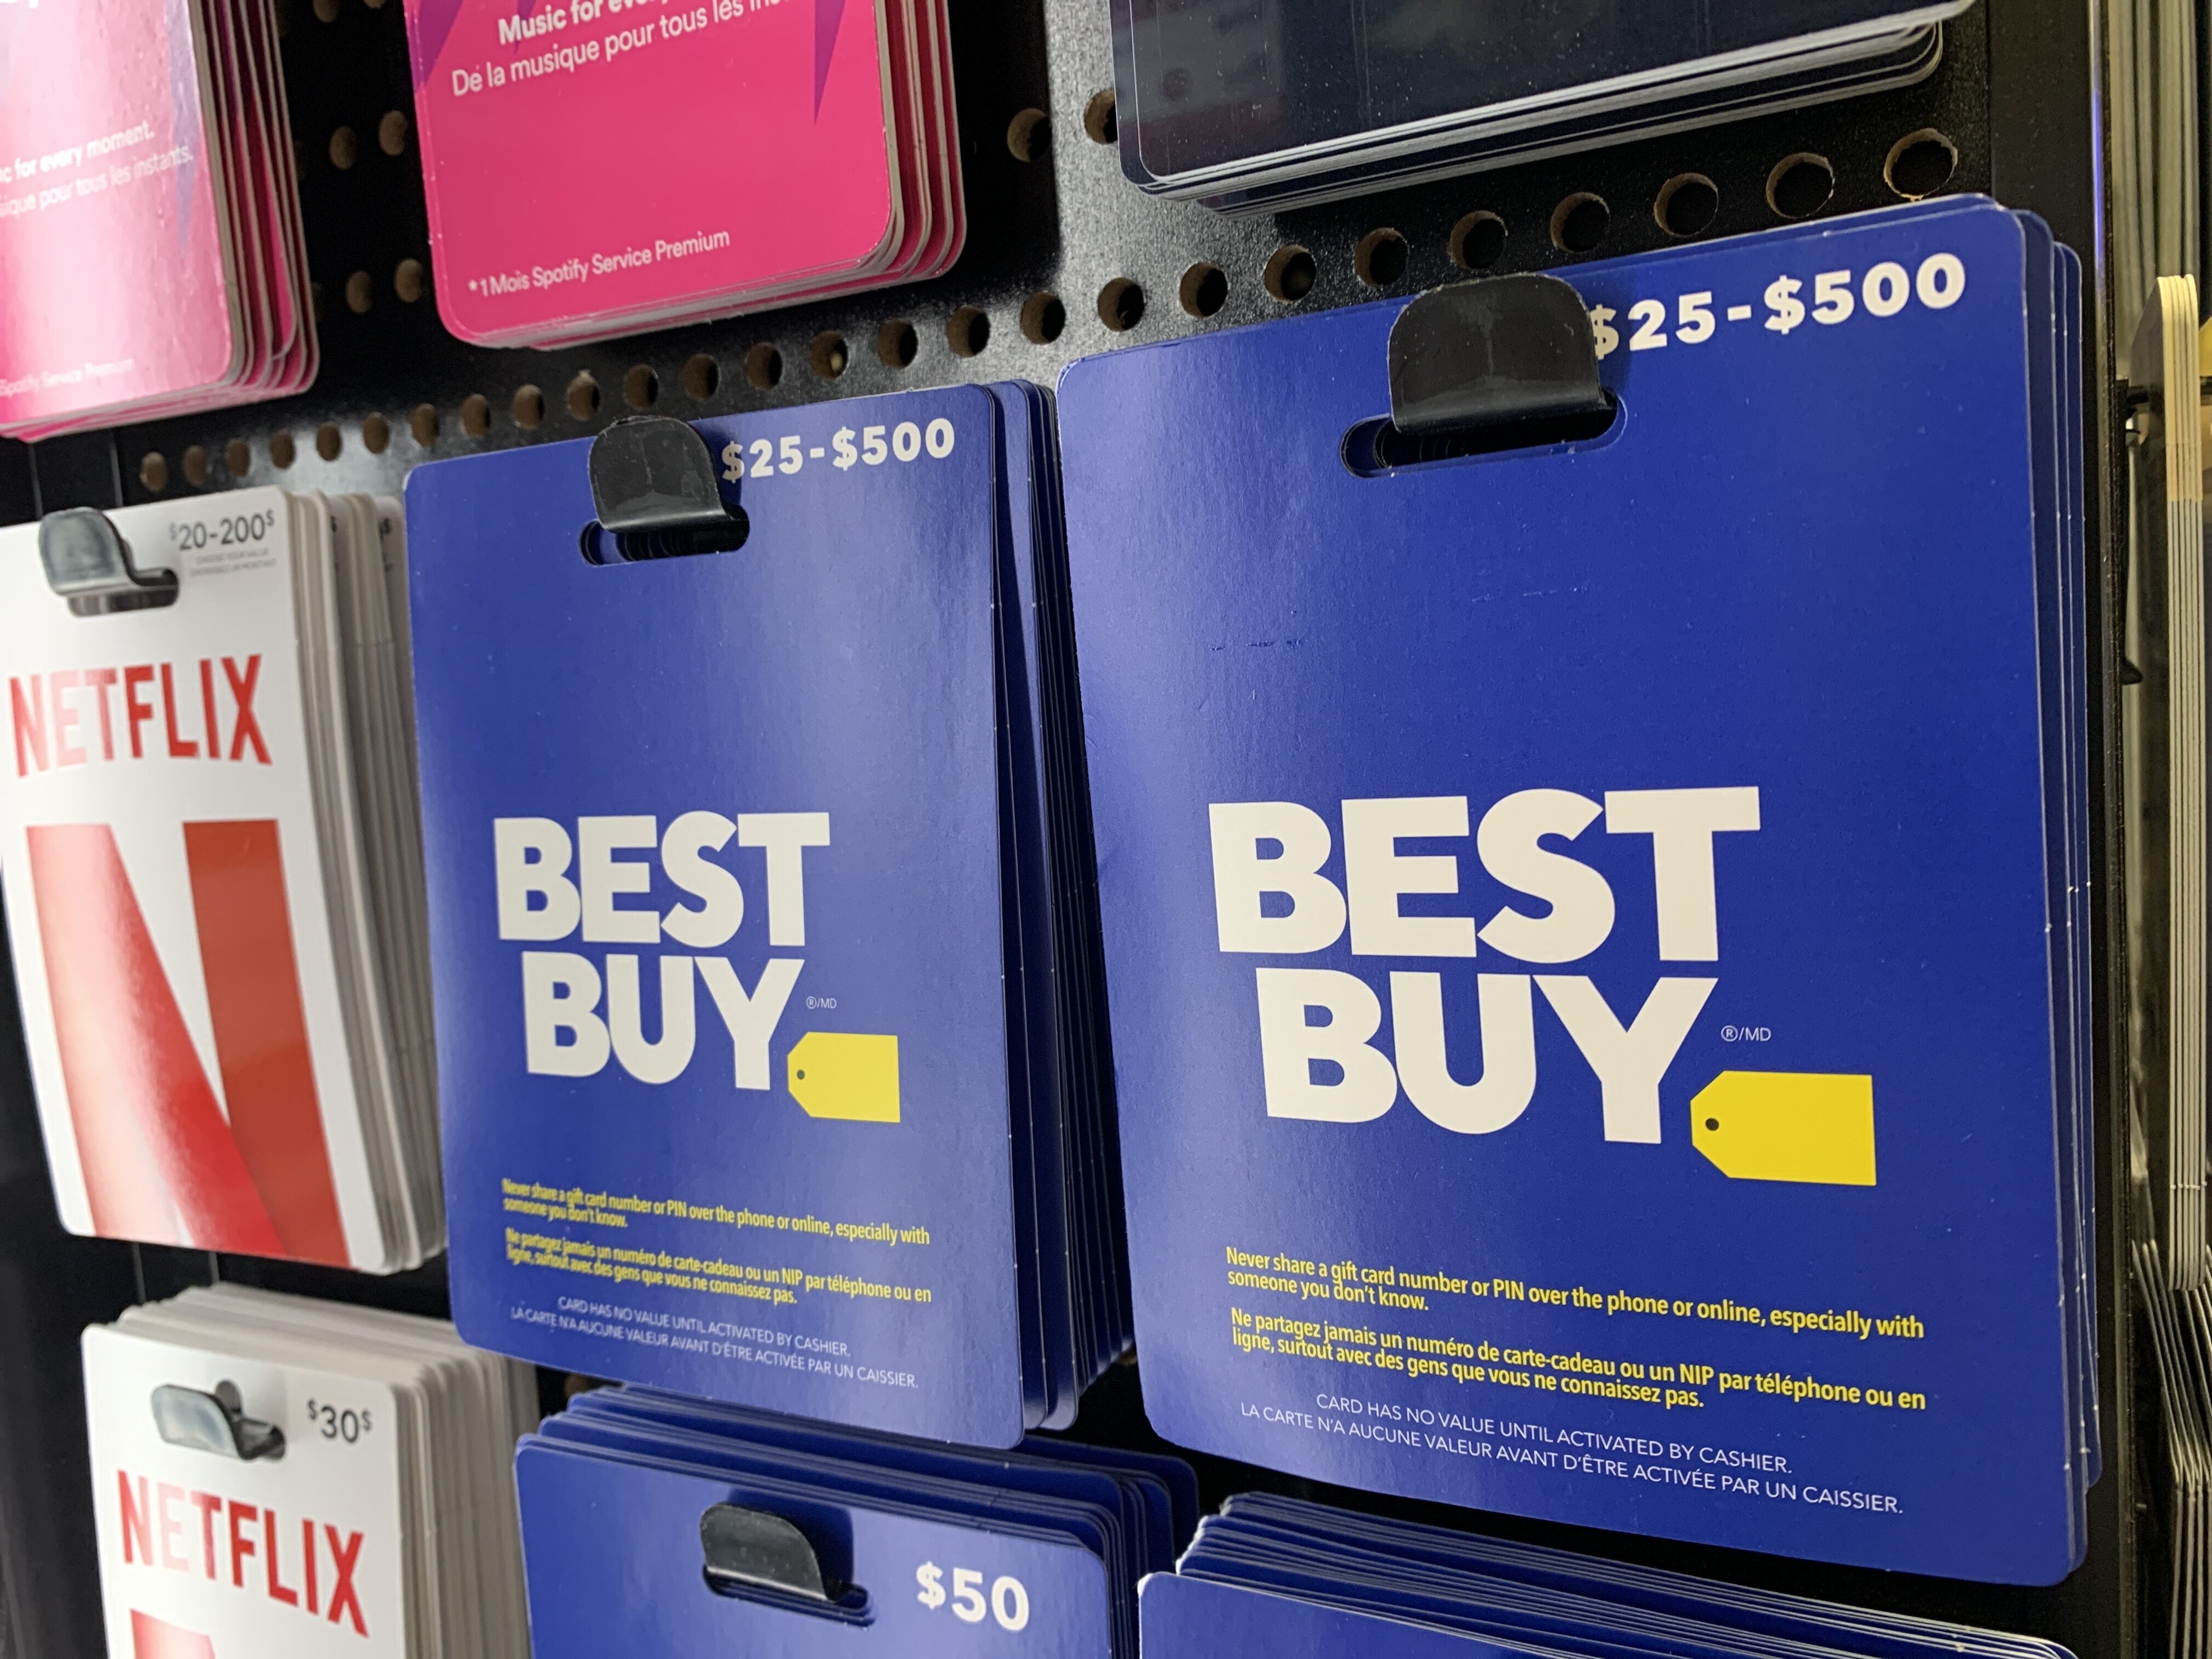 Where can I buy Best Buy Giftcards $25-$500? - RedFlagDeals.com Forums